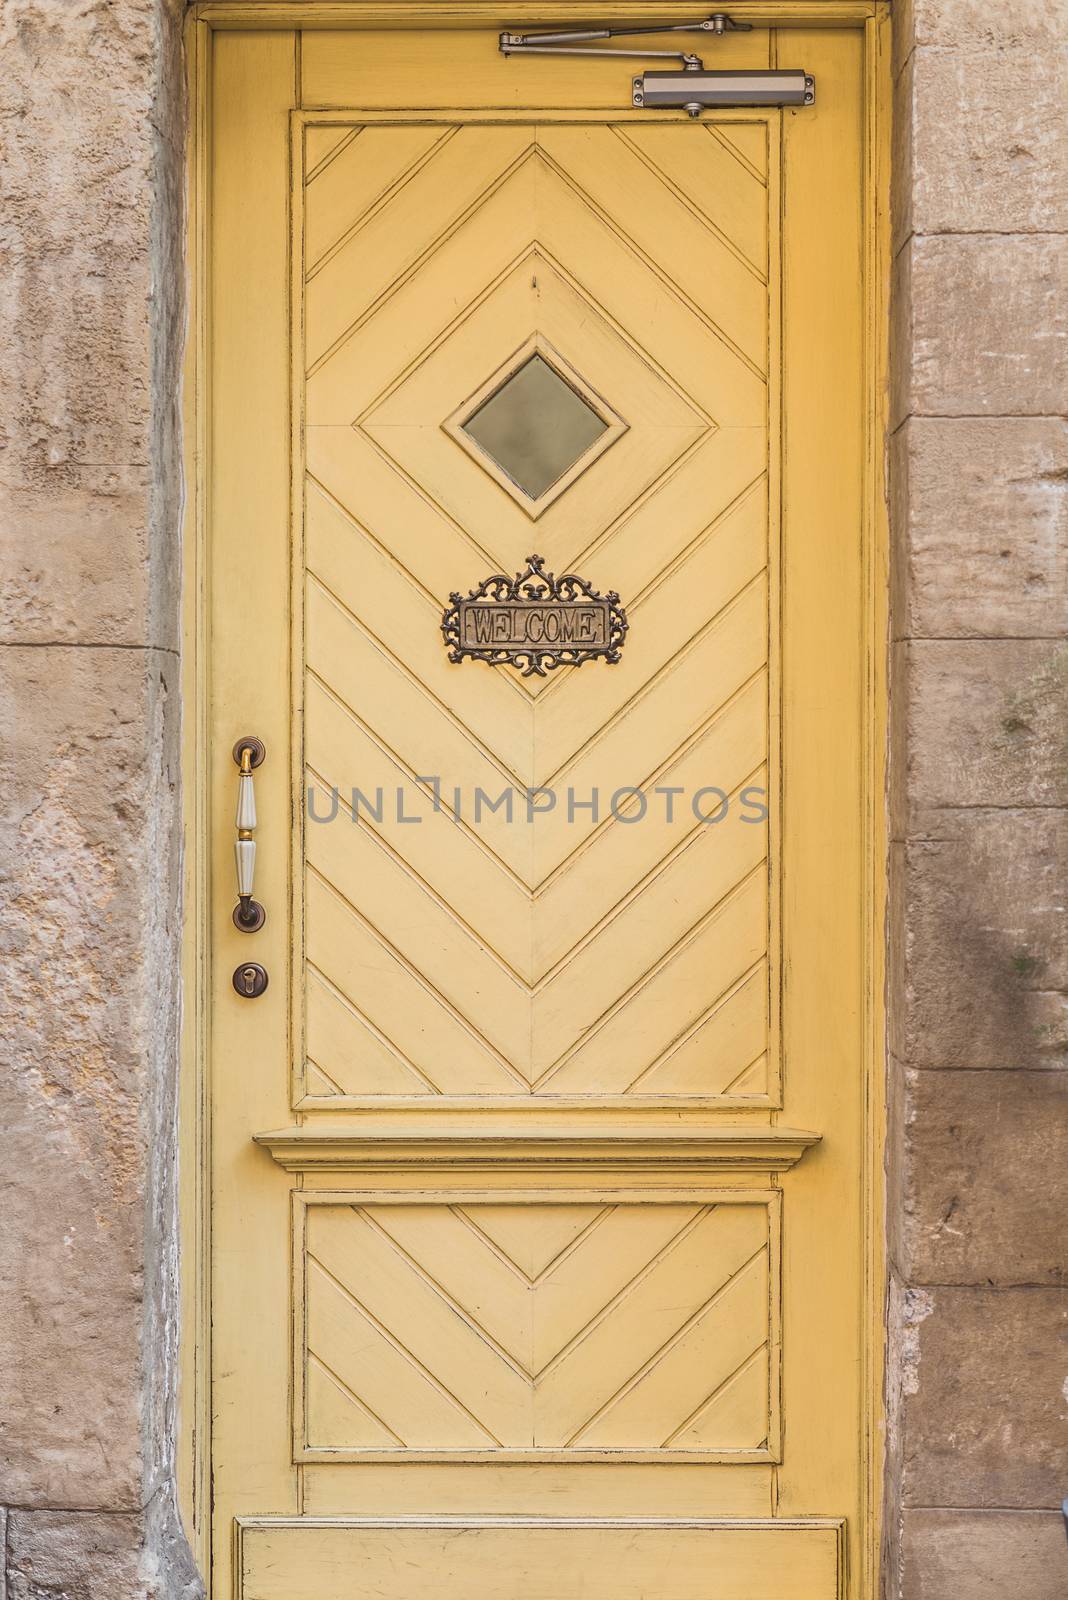 Old yellow wooden door with a small window and welcome sign at Stone House